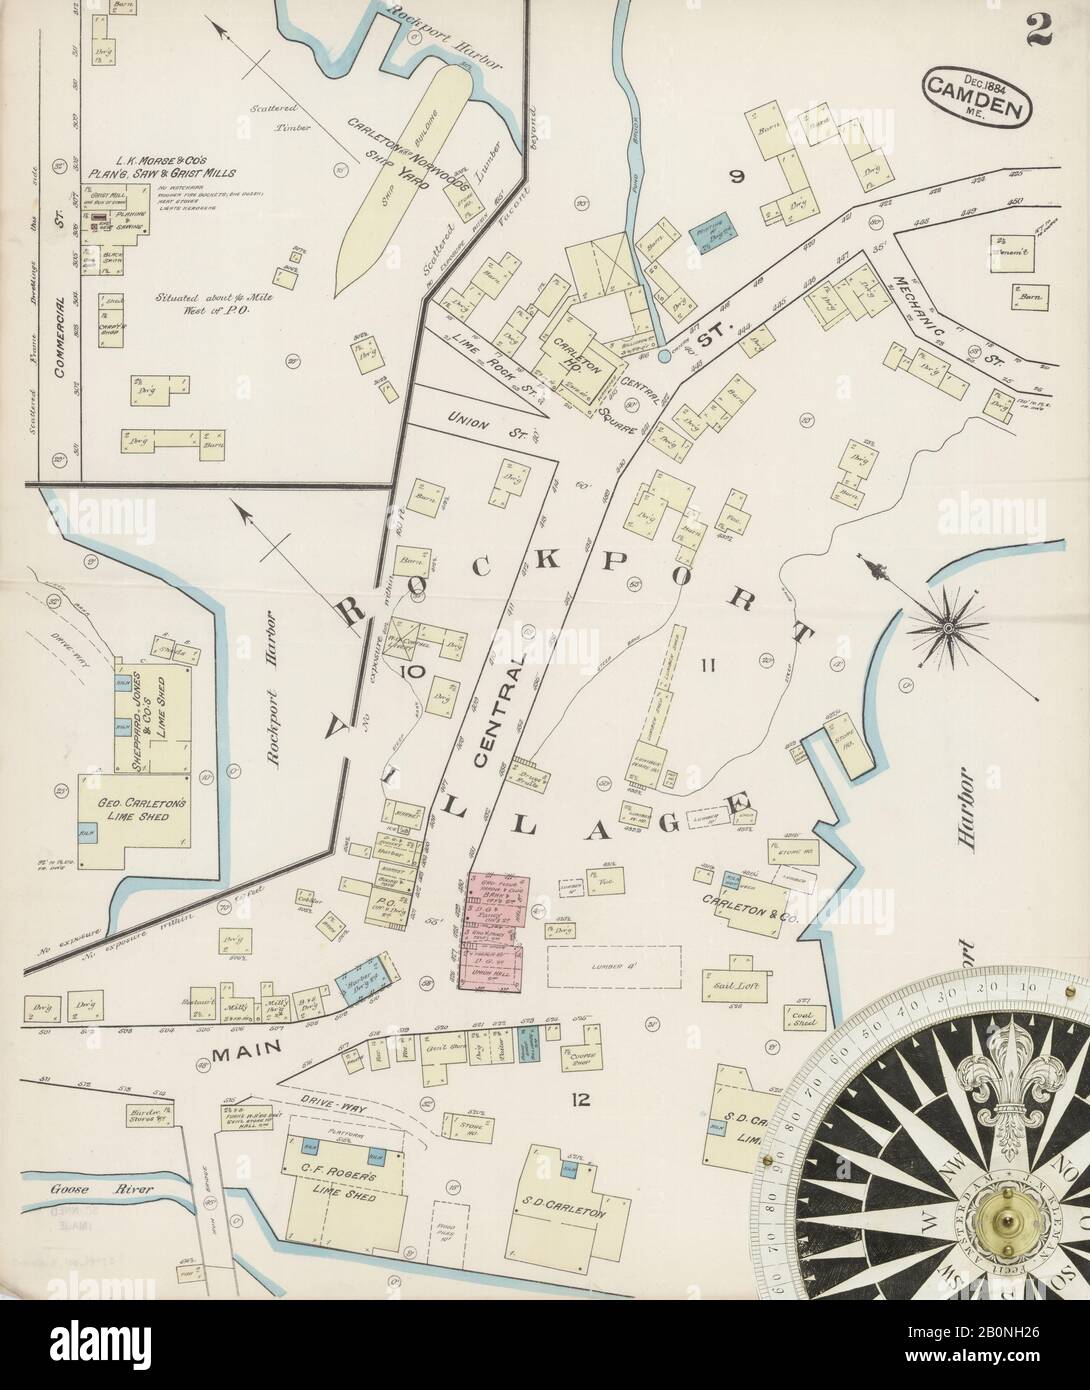 Image 2 of Sanborn Fire Insurance Map from Camden, Knox County, Maine. Dec 1884. 2 Sheet(s), America, street map with a Nineteenth Century compass Stock Photo